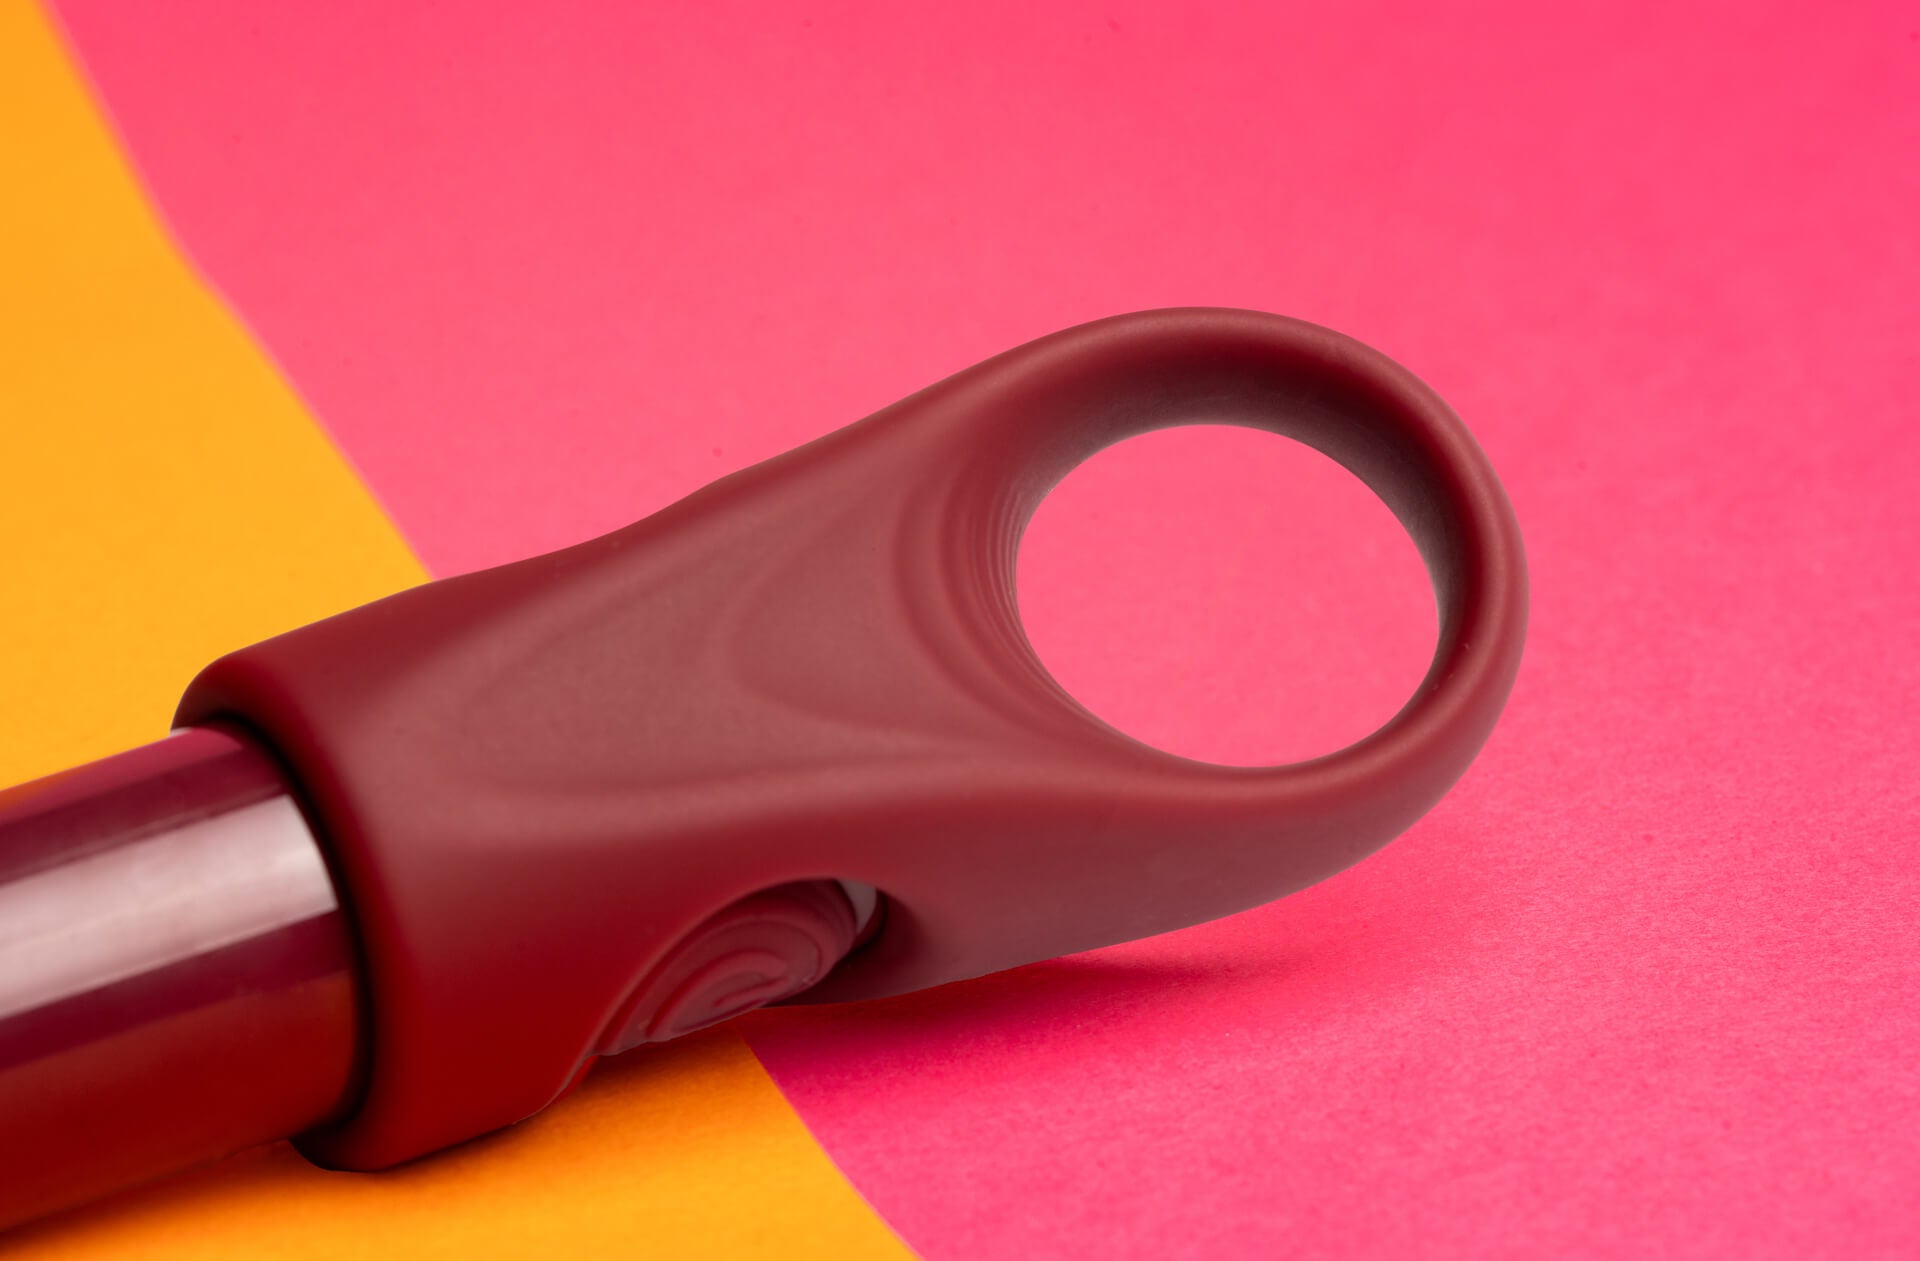 Ergonomic finger loop with easy access power button on the side.